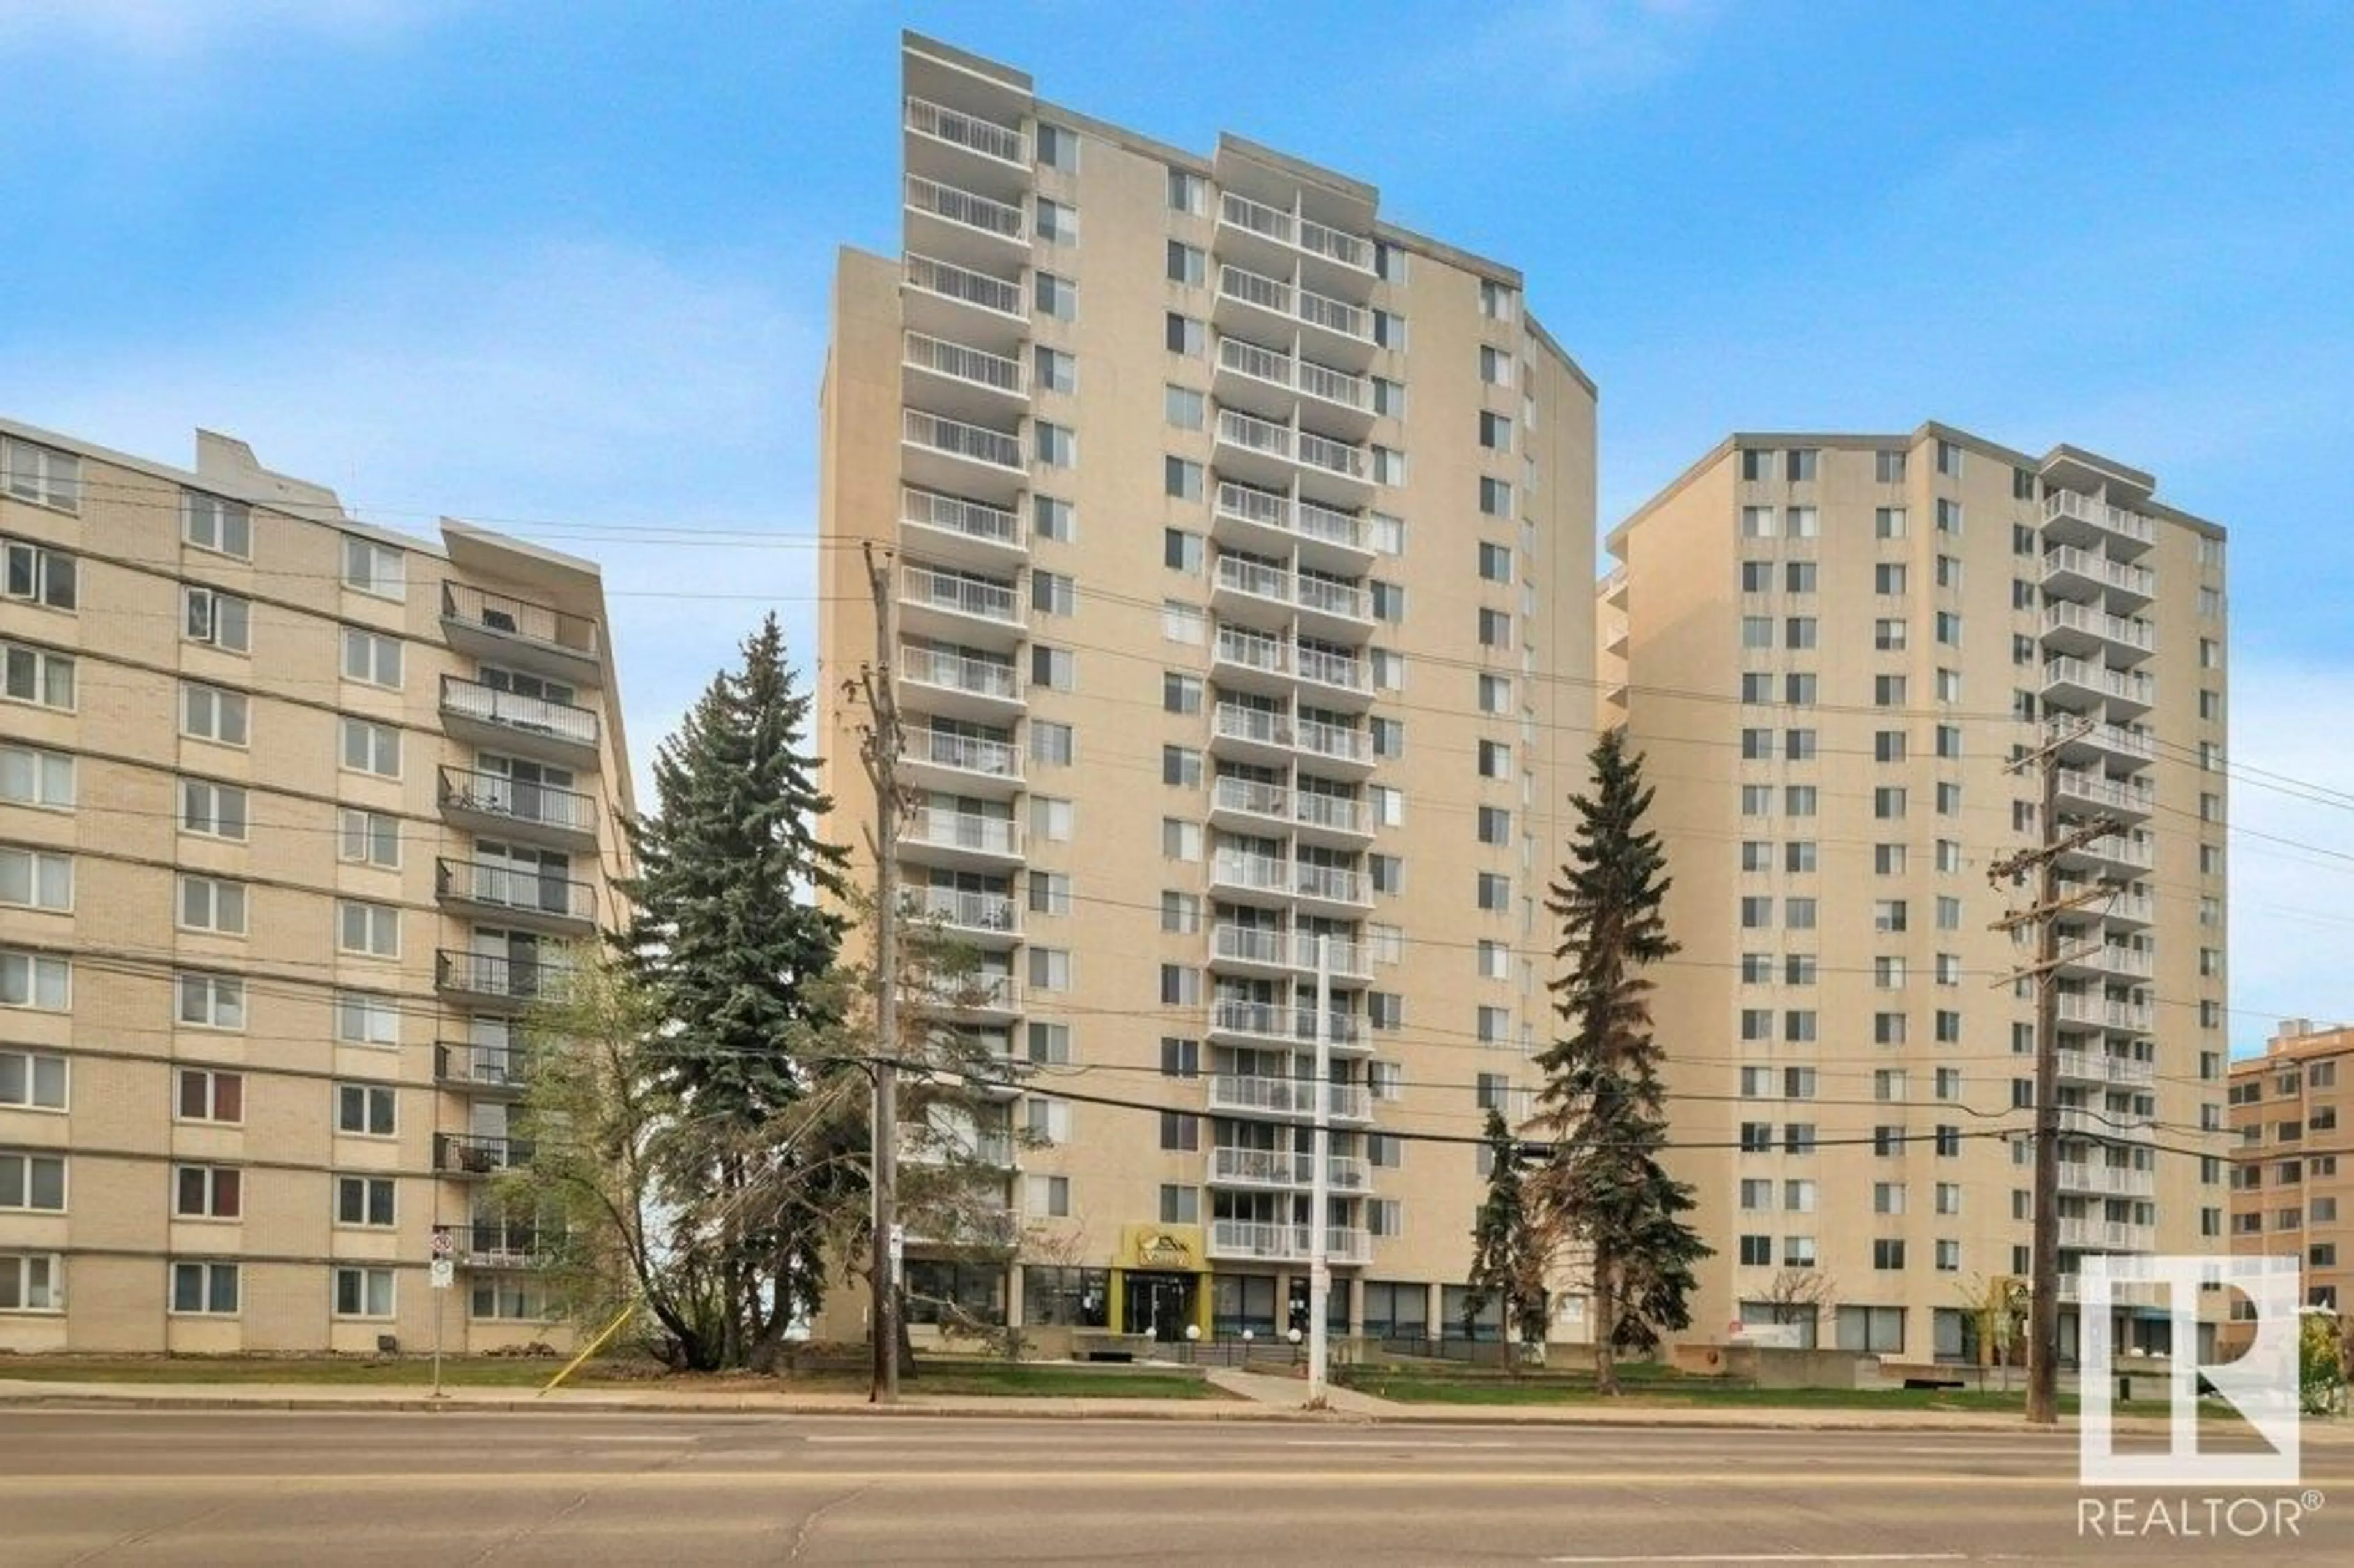 A pic from exterior of the house or condo for #1204 12121 JASPER AV NW, Edmonton Alberta T5N3X7